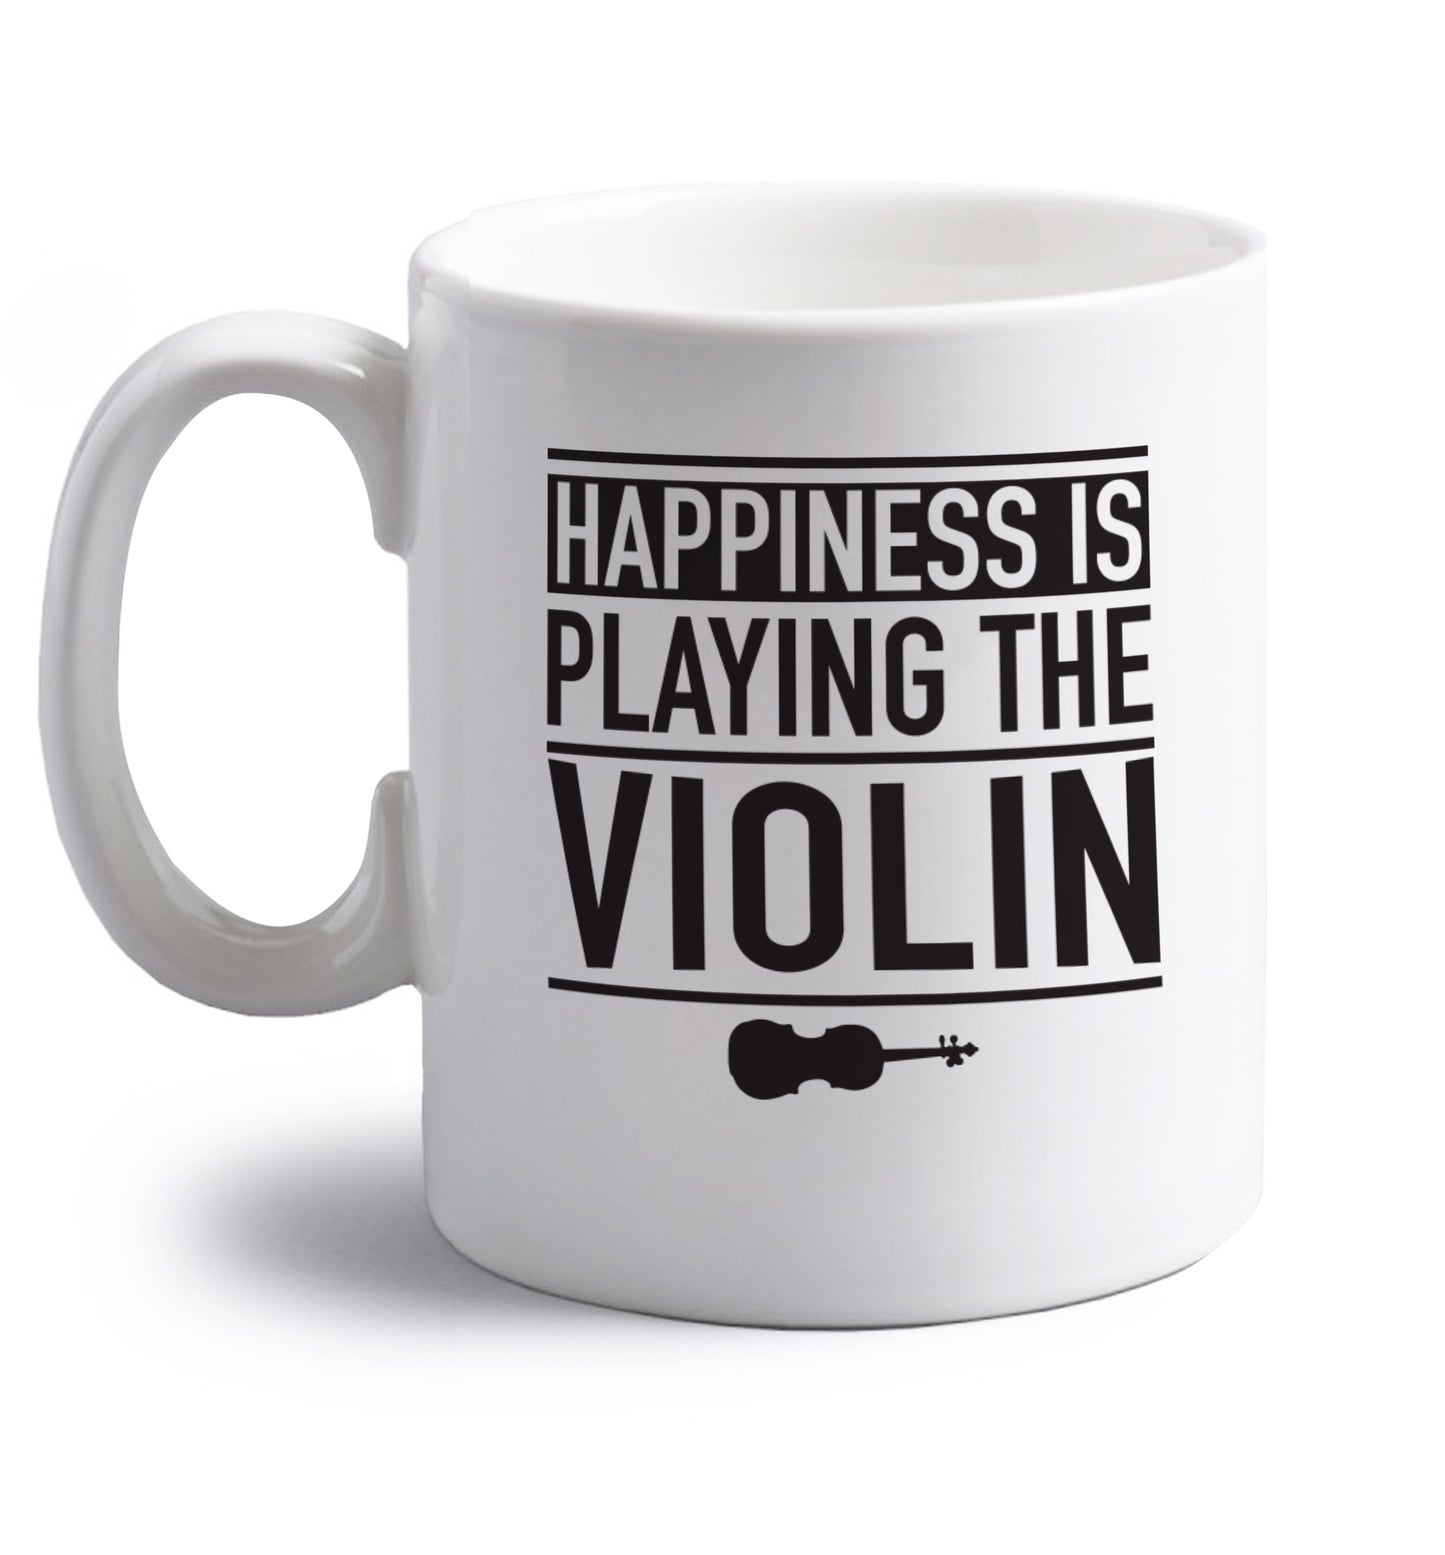 Happiness is playing the violin right handed white ceramic mug 